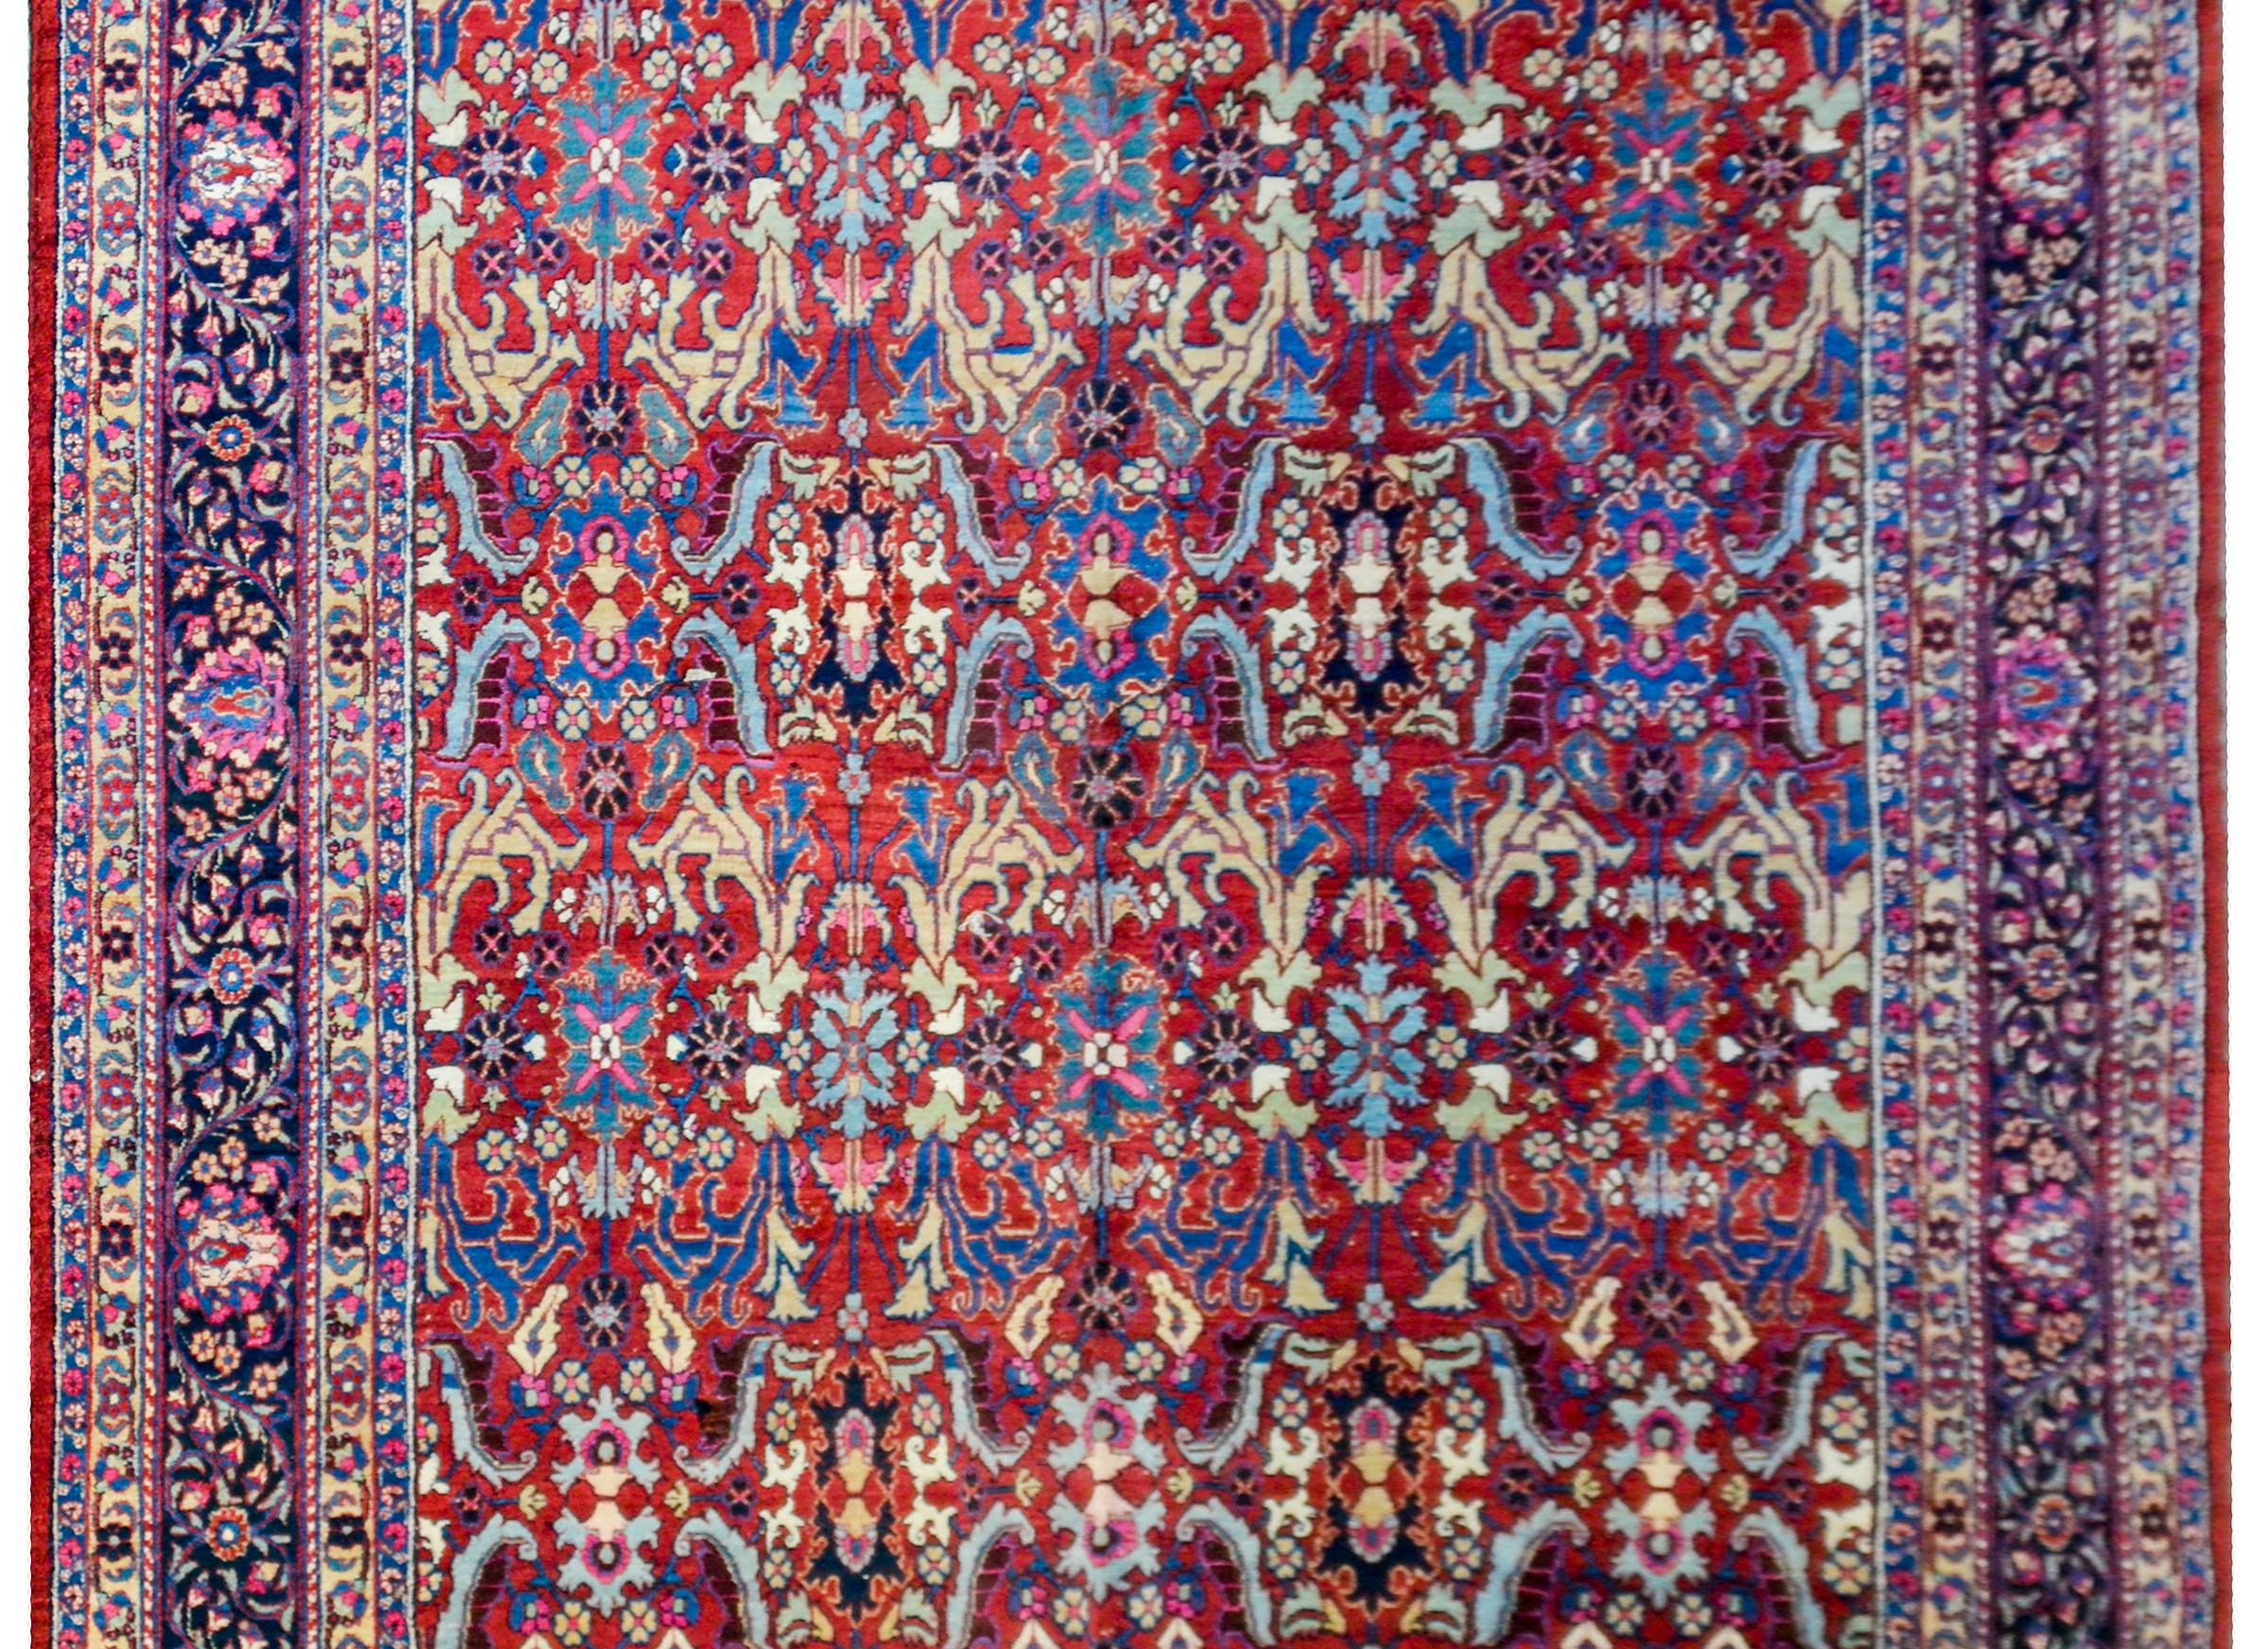 An unbelievable early 20th century Persian Heriz rug with an incredible all-over mirrored floral and leaf trellis pattern woven in light and dark indigo, yellow, and pink on a brilliant crimson background. The border is wonderful with a wide central